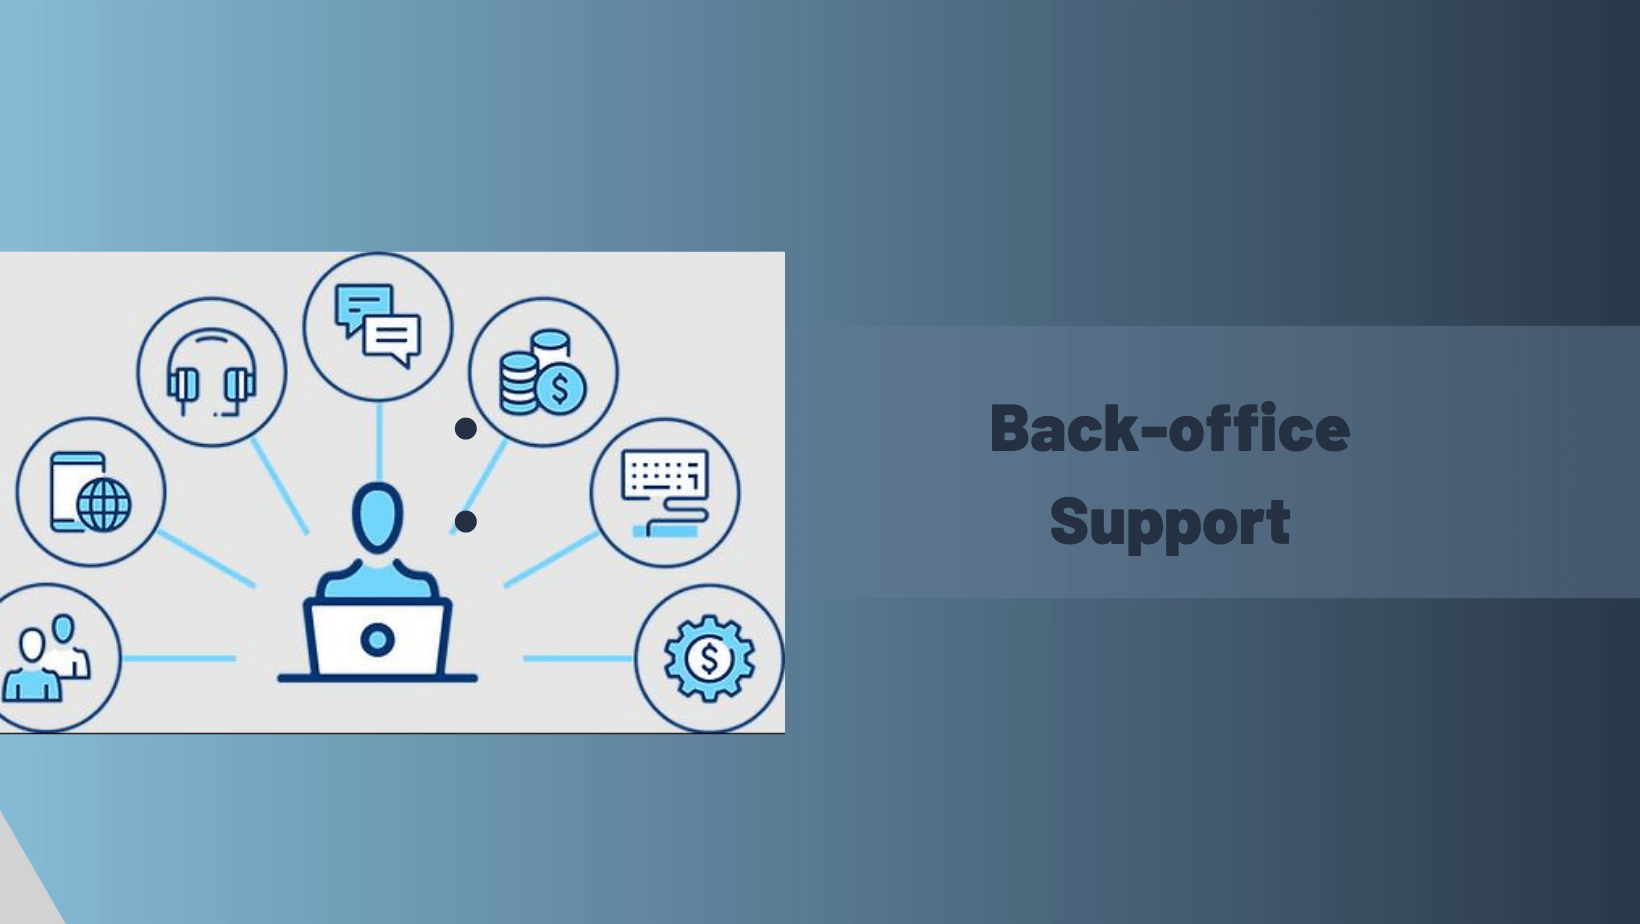 Back-office Support